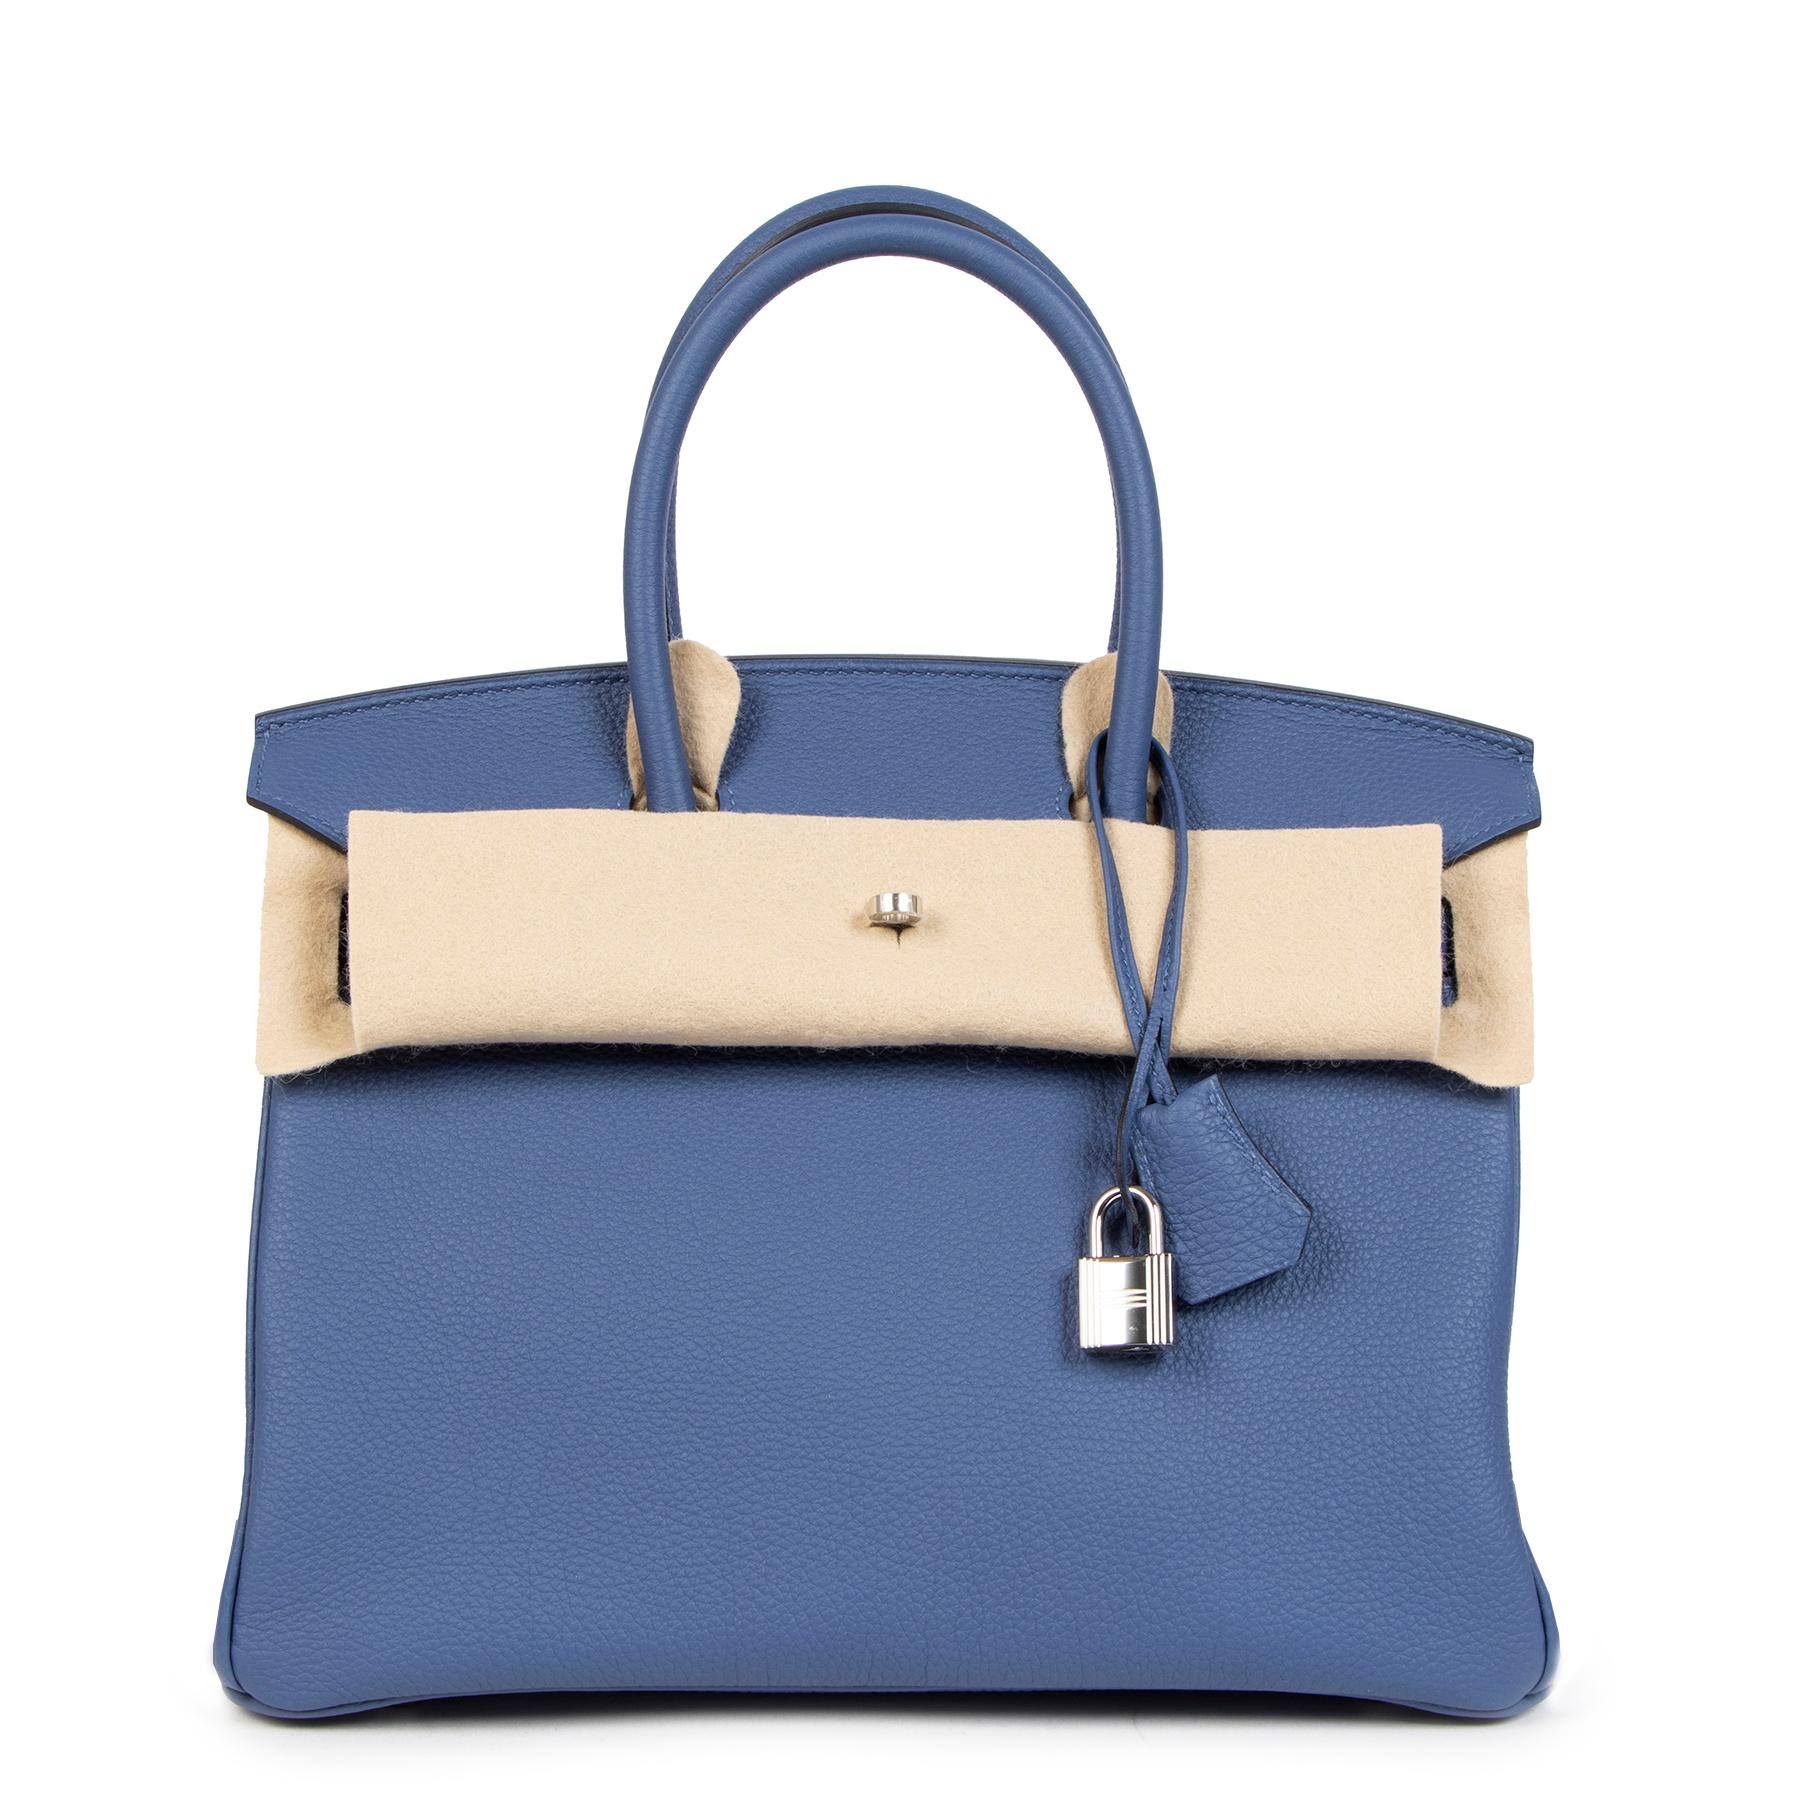 Never Used 

Never Used Hermes Blue Brighton Togo Birkin 30 PHW

Skip the waiting list and get your hands on the most iconic bag of all time: the Hermès Birkin.
This Hermès Birkin in veau togo comes in a gorgeous 